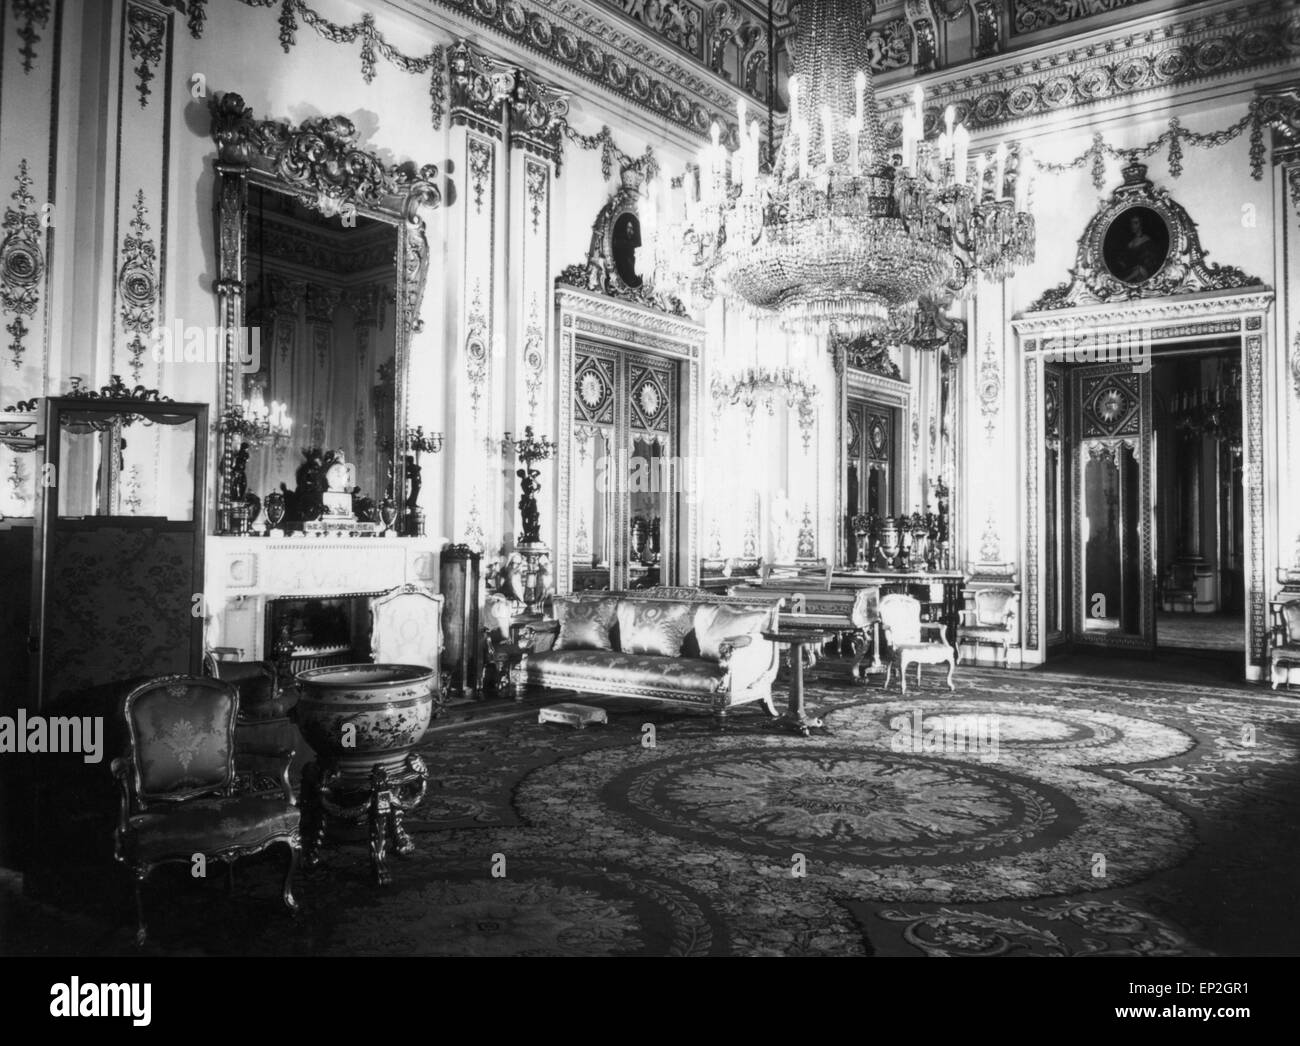 Interior view of Buckingham Palace showing the White Drawing Room, circa 1960. Stock Photo